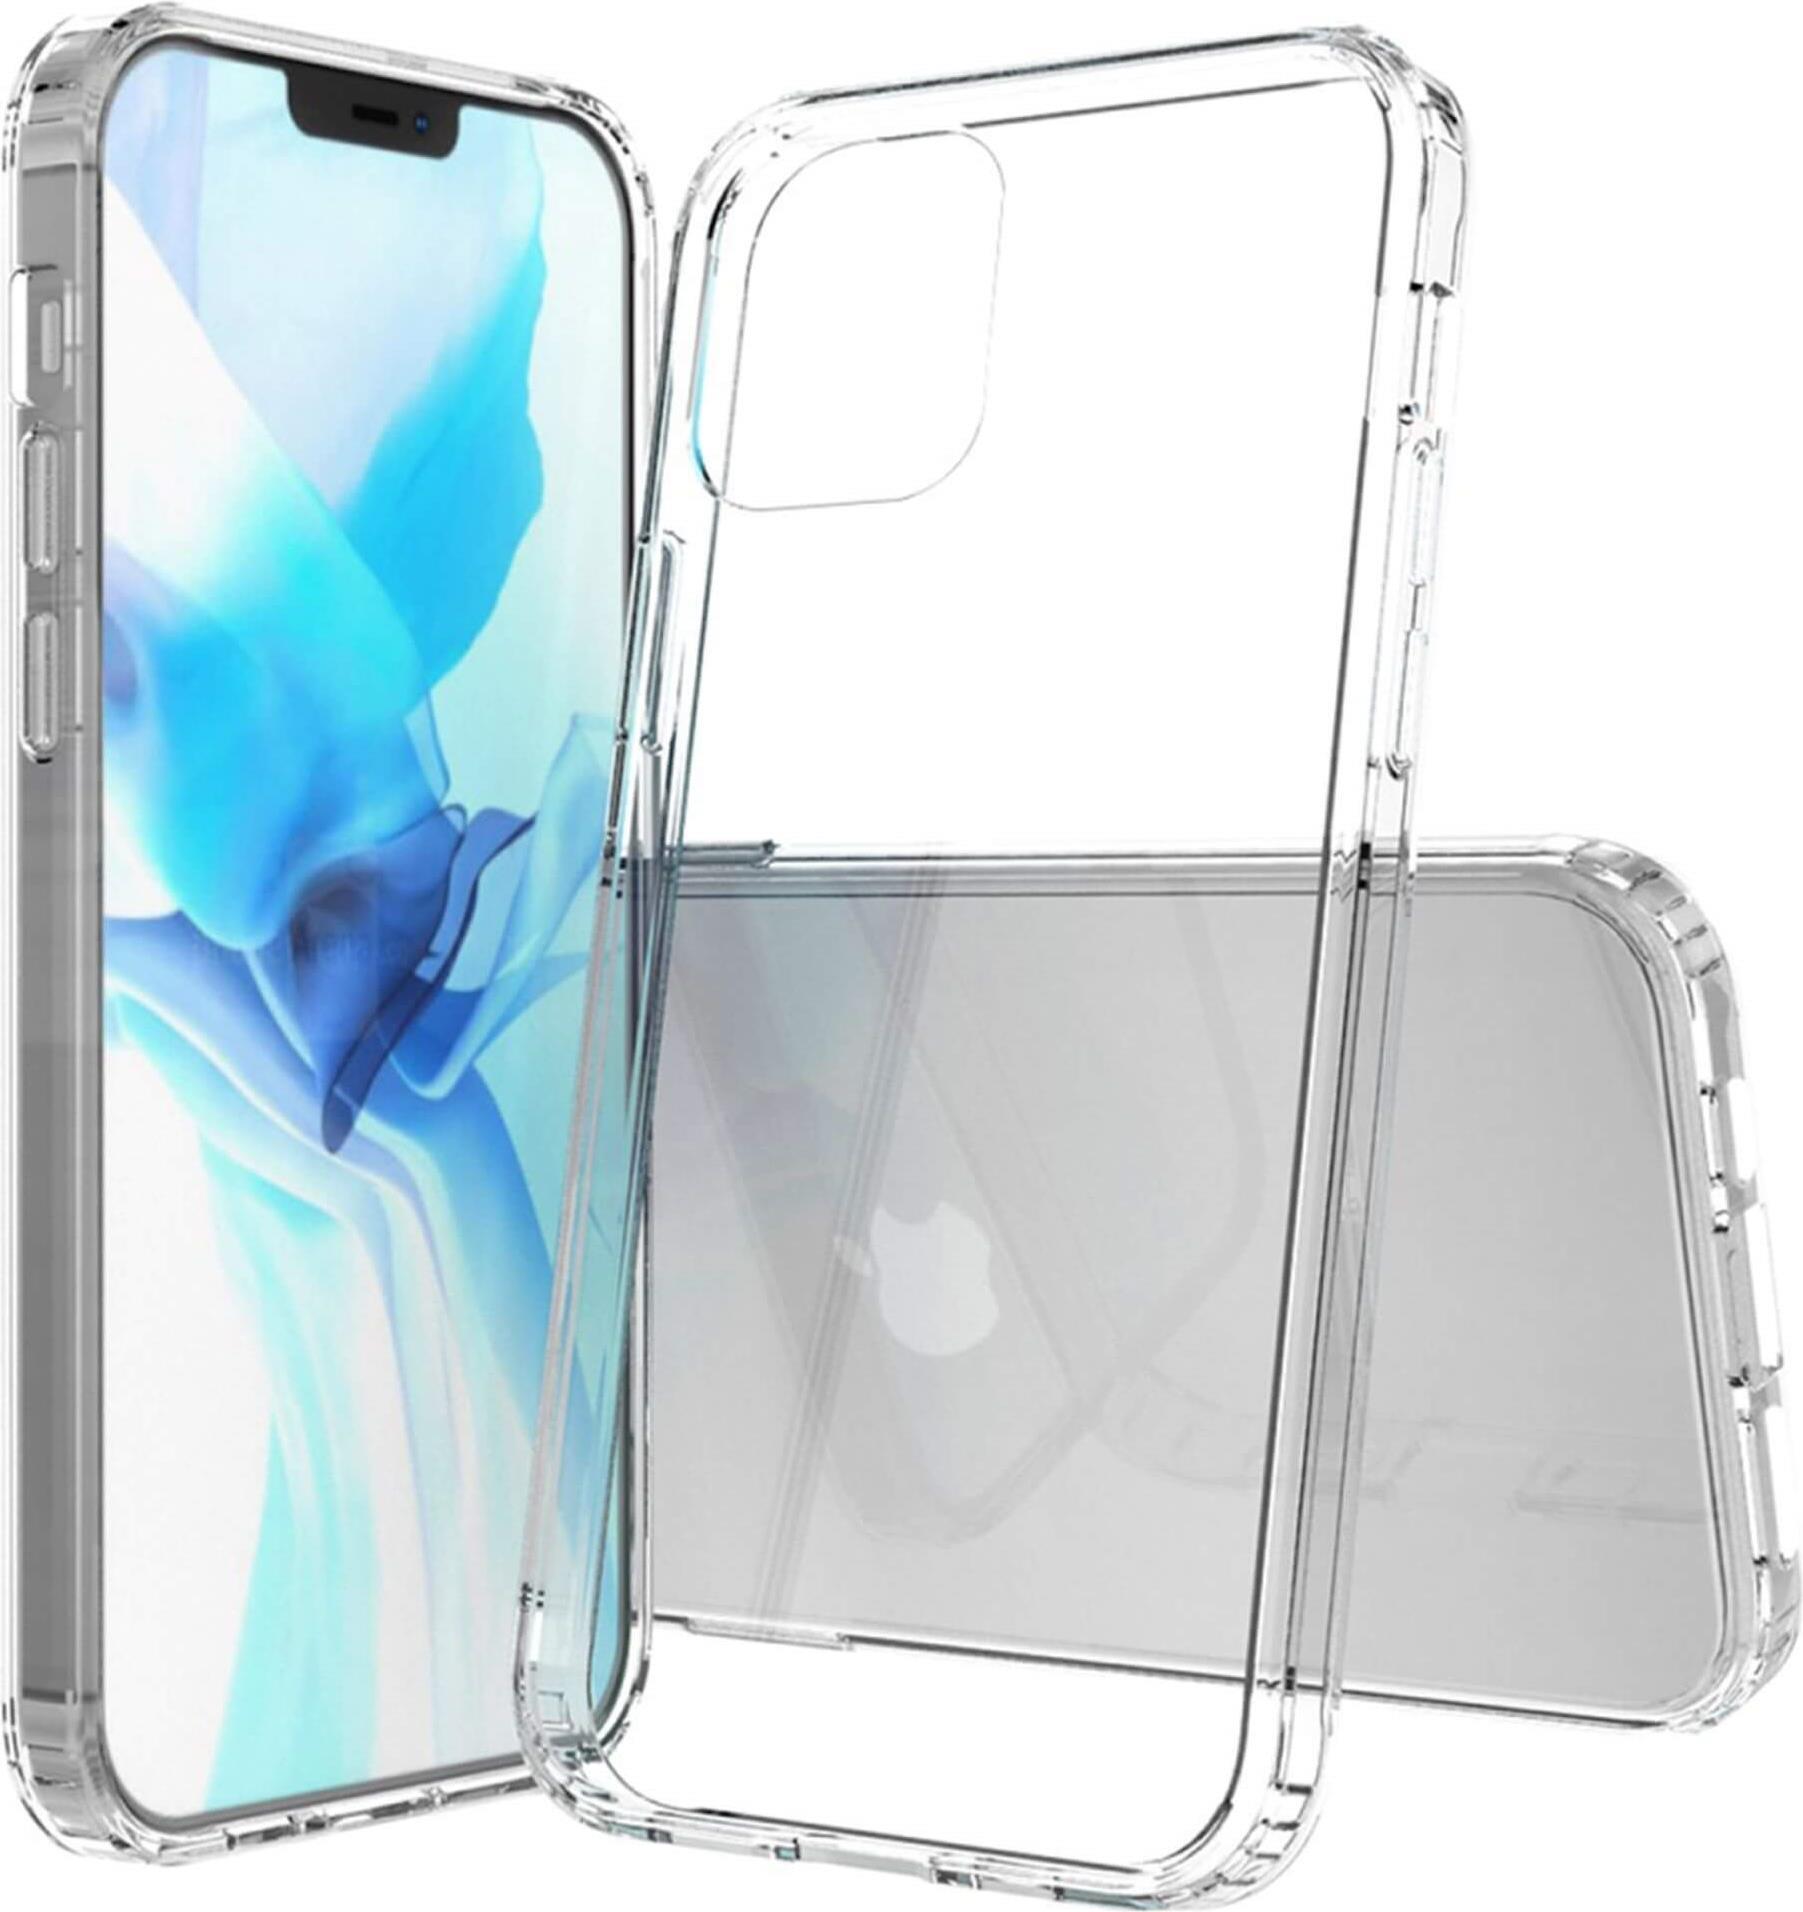 grotop JT BackCase Pankow Clear für NEW iPhone 6.1", Transparent (10692)